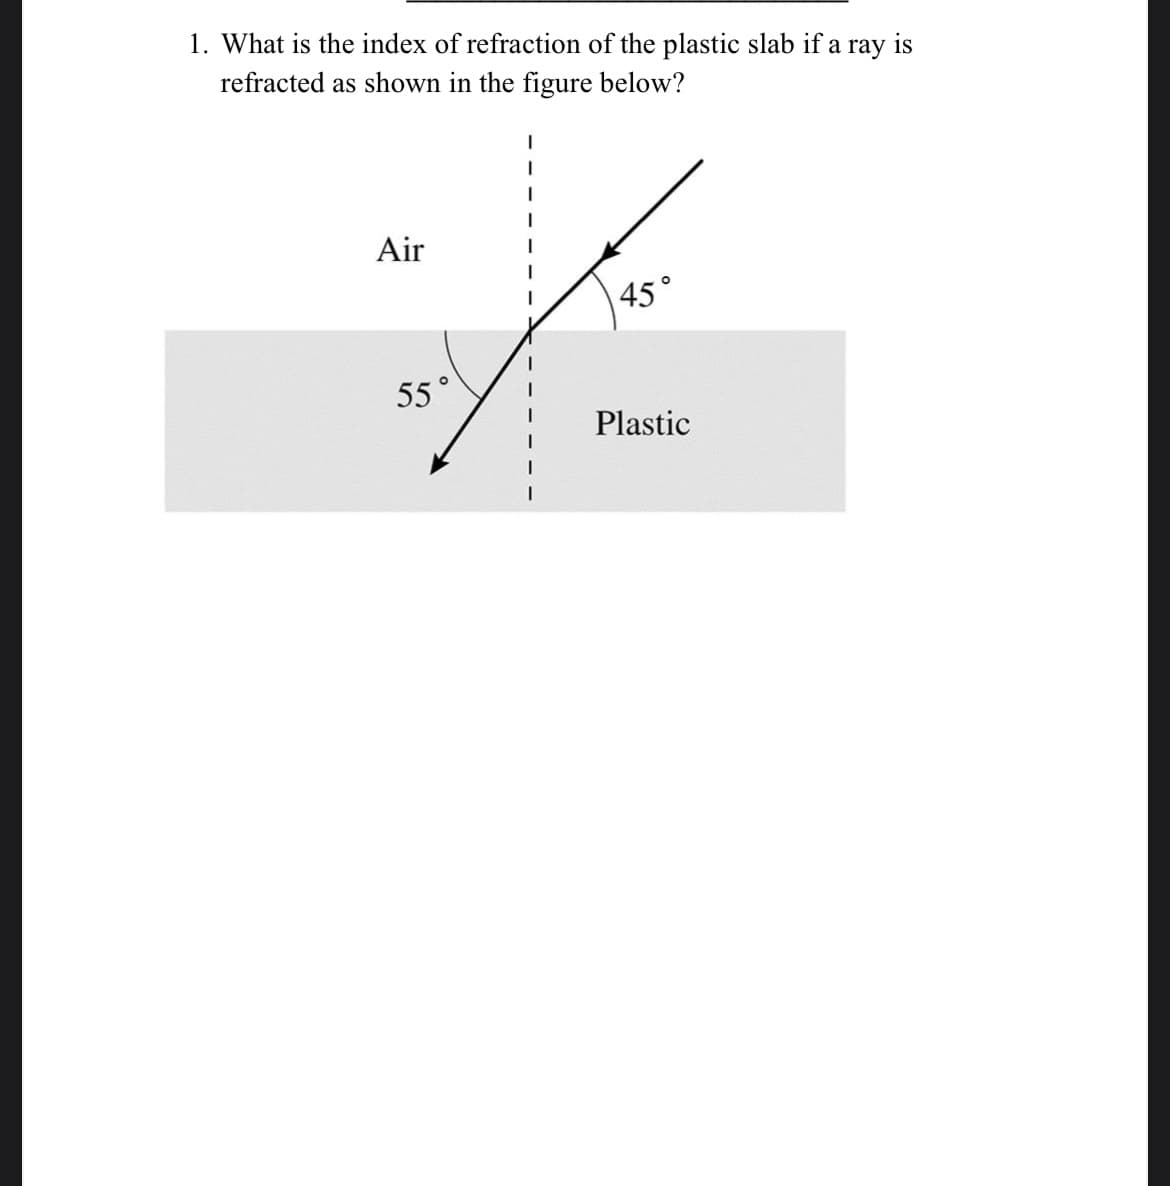 1. What is the index of refraction of the plastic slab if a ray is
refracted as shown in the figure below?
Air
55°
45°
Plastic